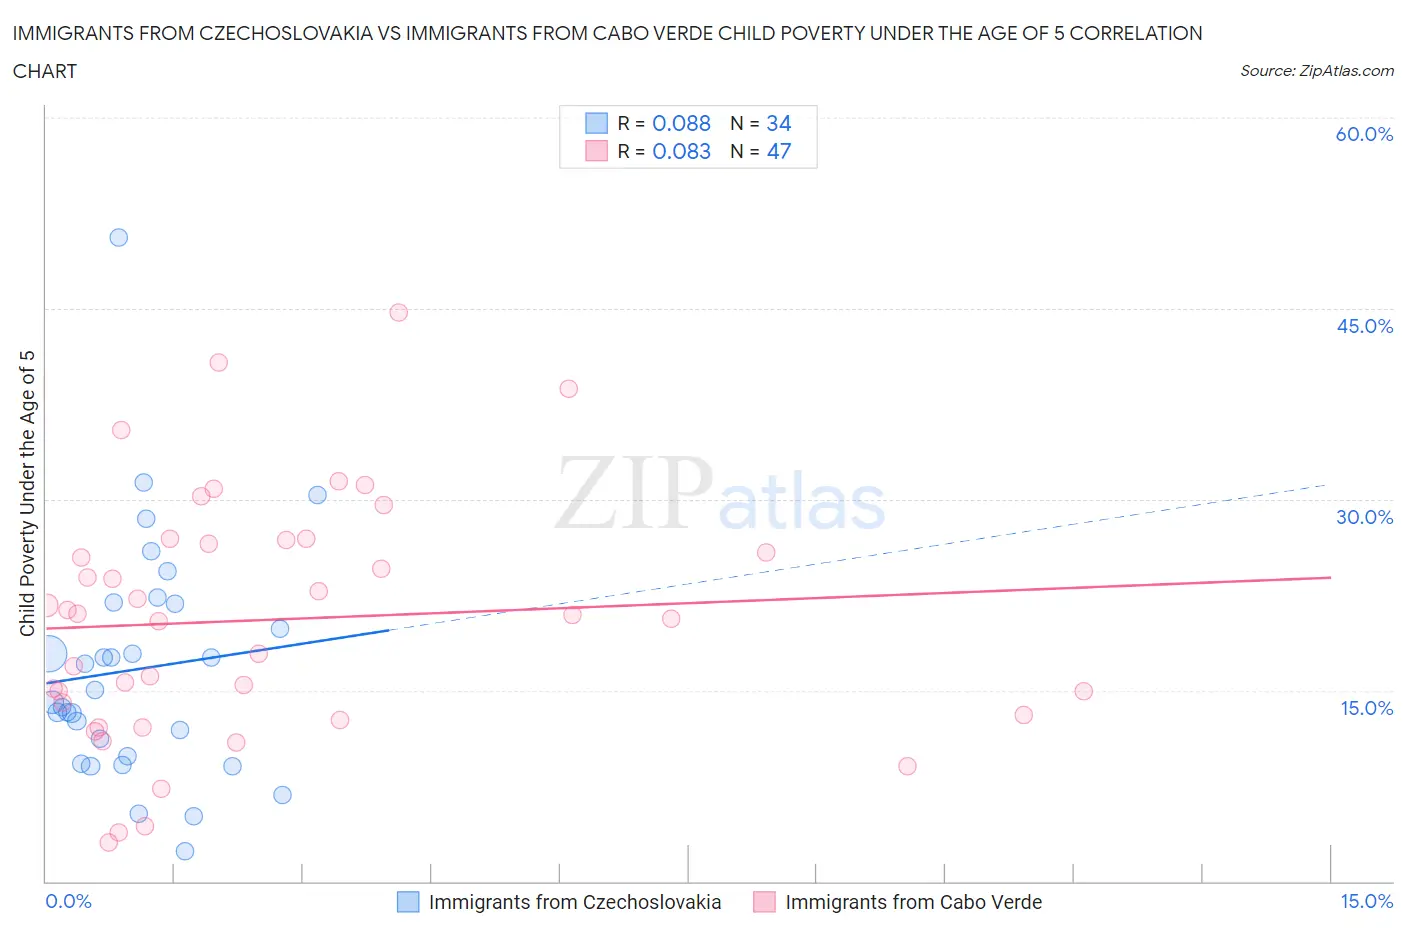 Immigrants from Czechoslovakia vs Immigrants from Cabo Verde Child Poverty Under the Age of 5